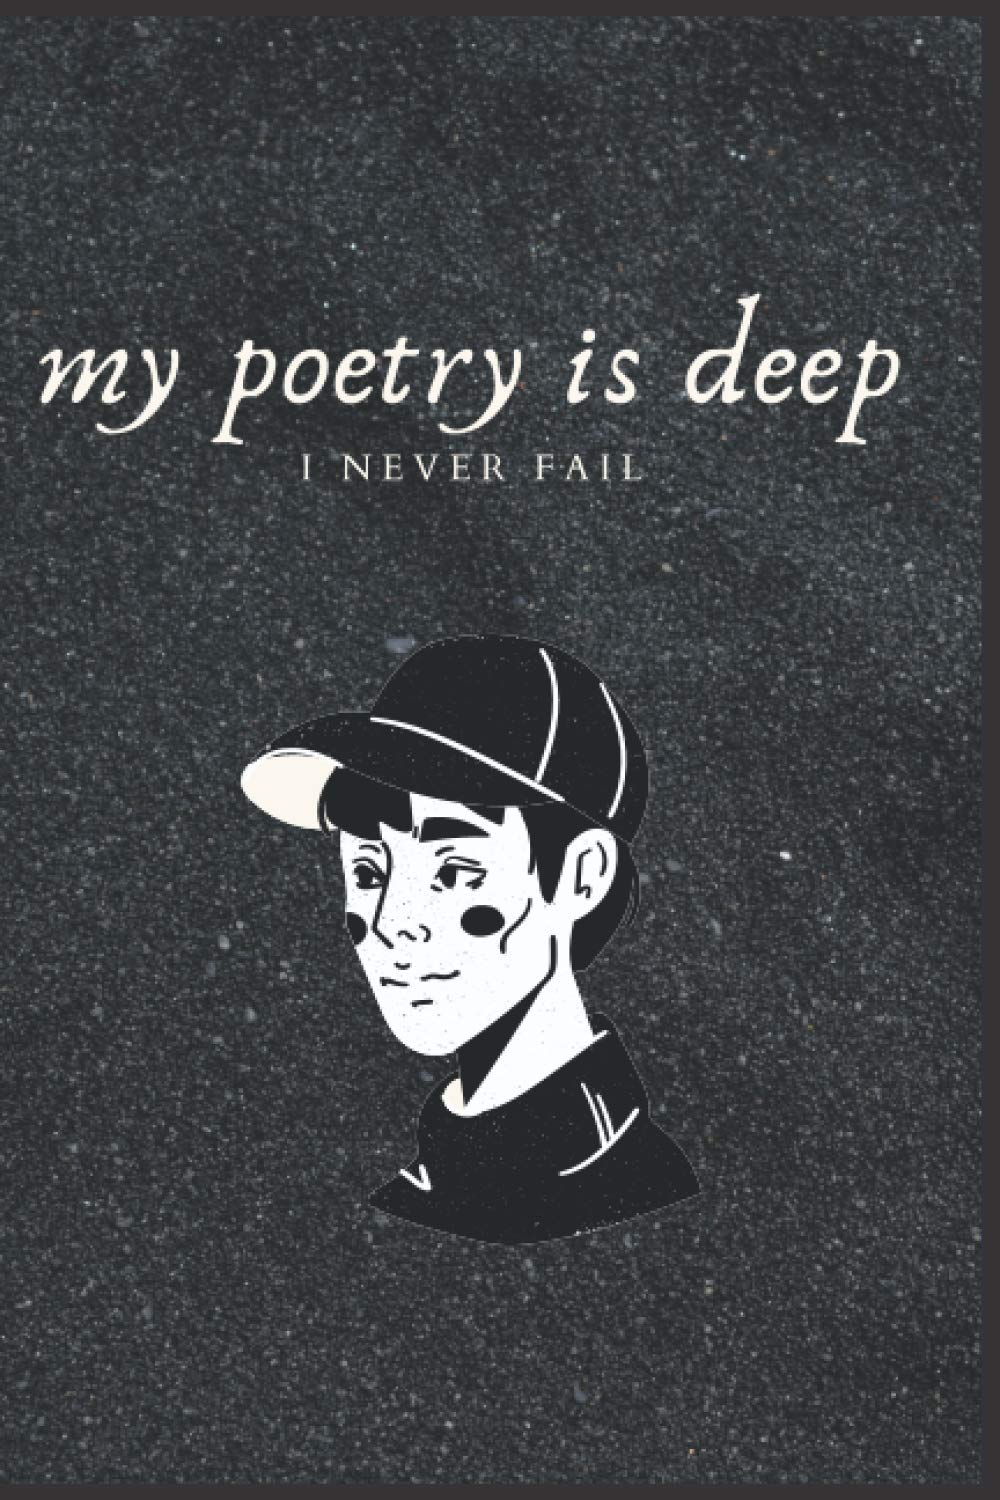 My Poetry Is Deep I Never Fail Rhyme Notebook: A Rap Journal for Songwriters, Battle Rappers & Lyricists: Composition Size (6.0x9.0) With Lined. chorus, hooks and next Billboard Song